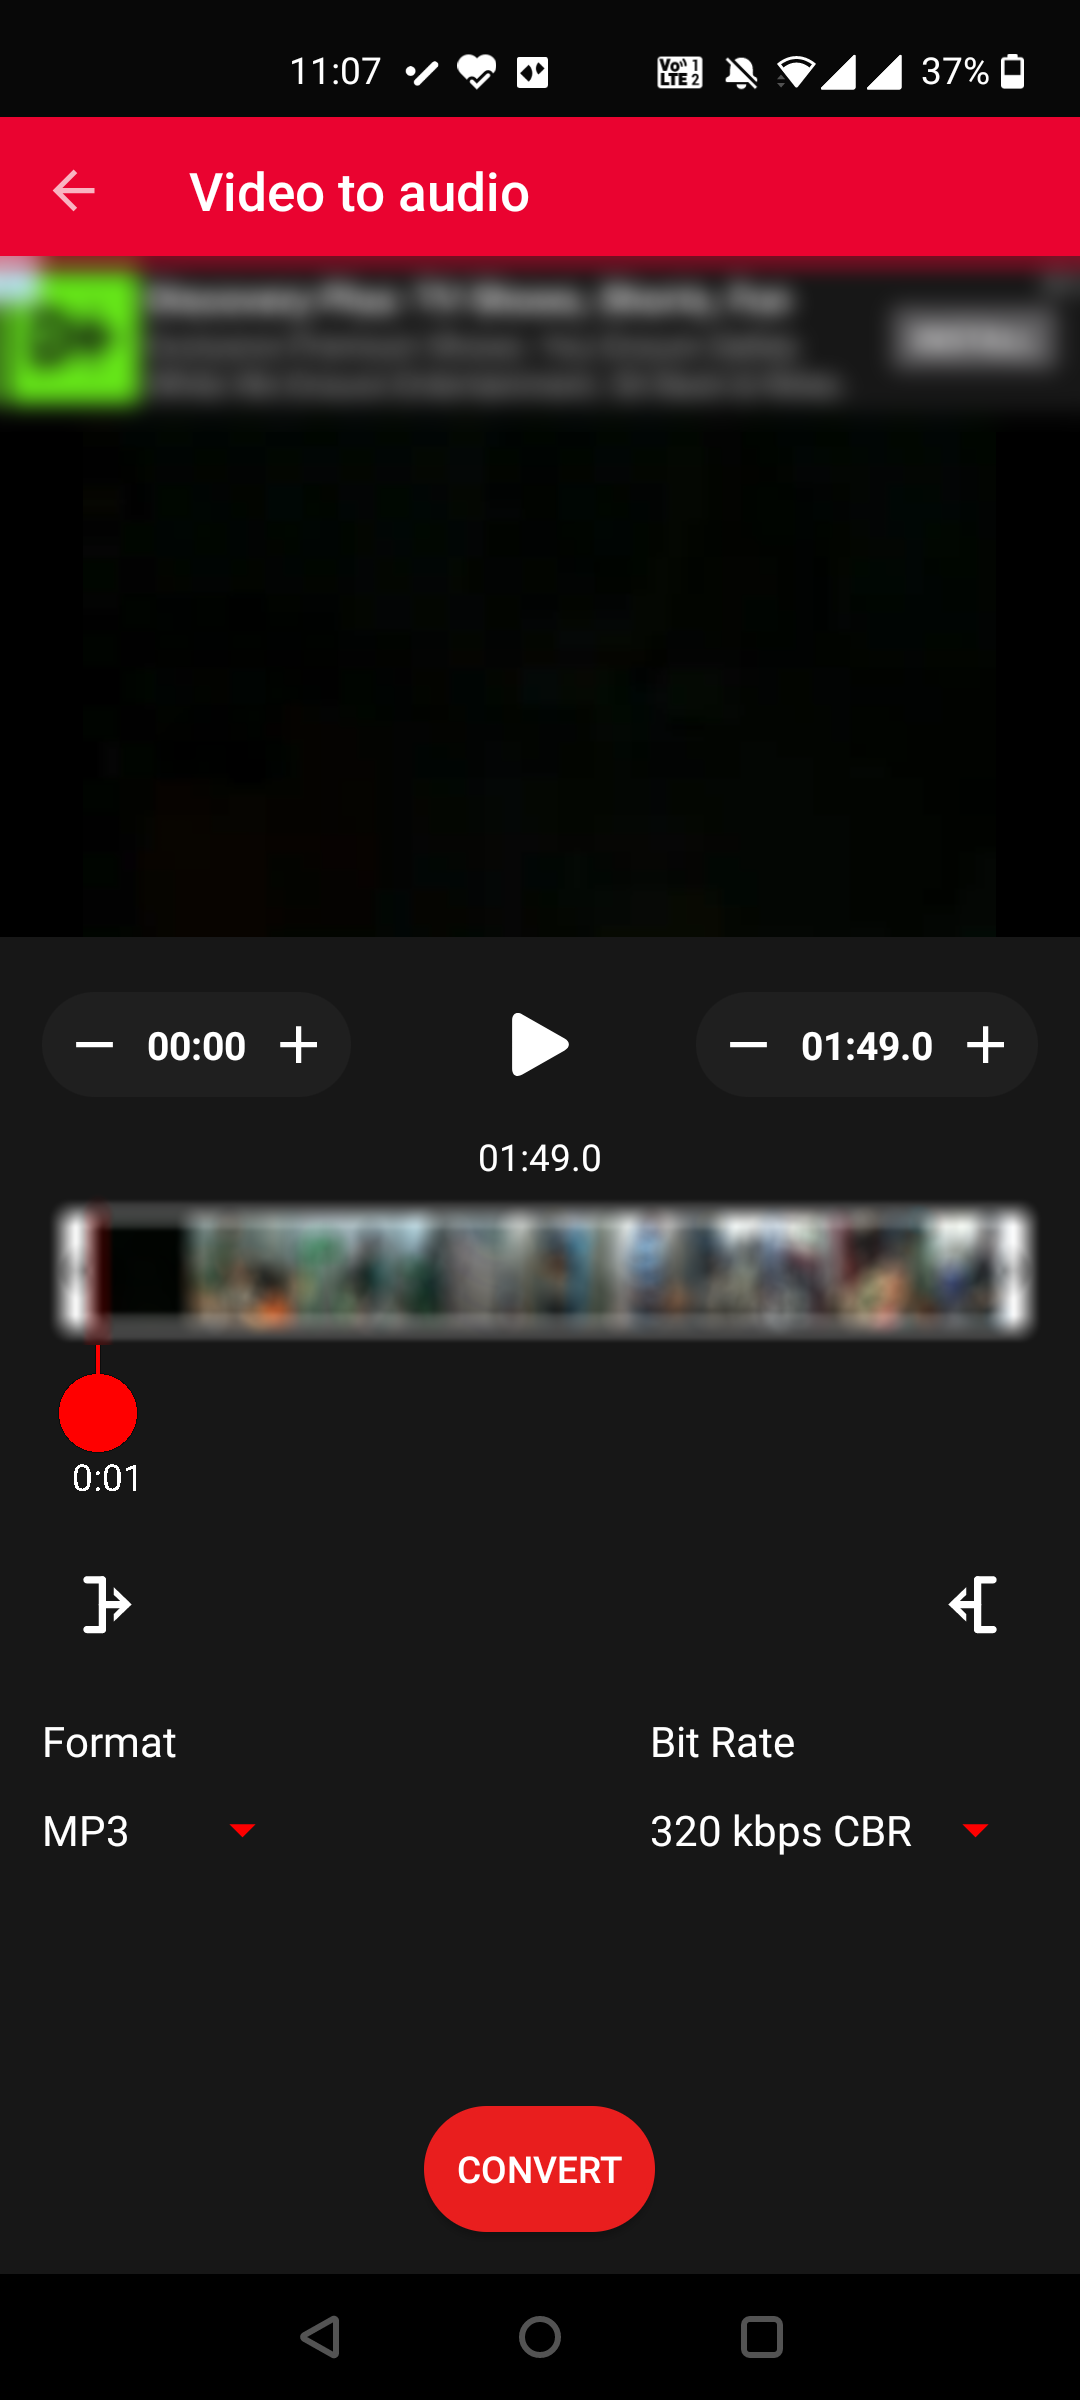 Extract the audio from video on Android